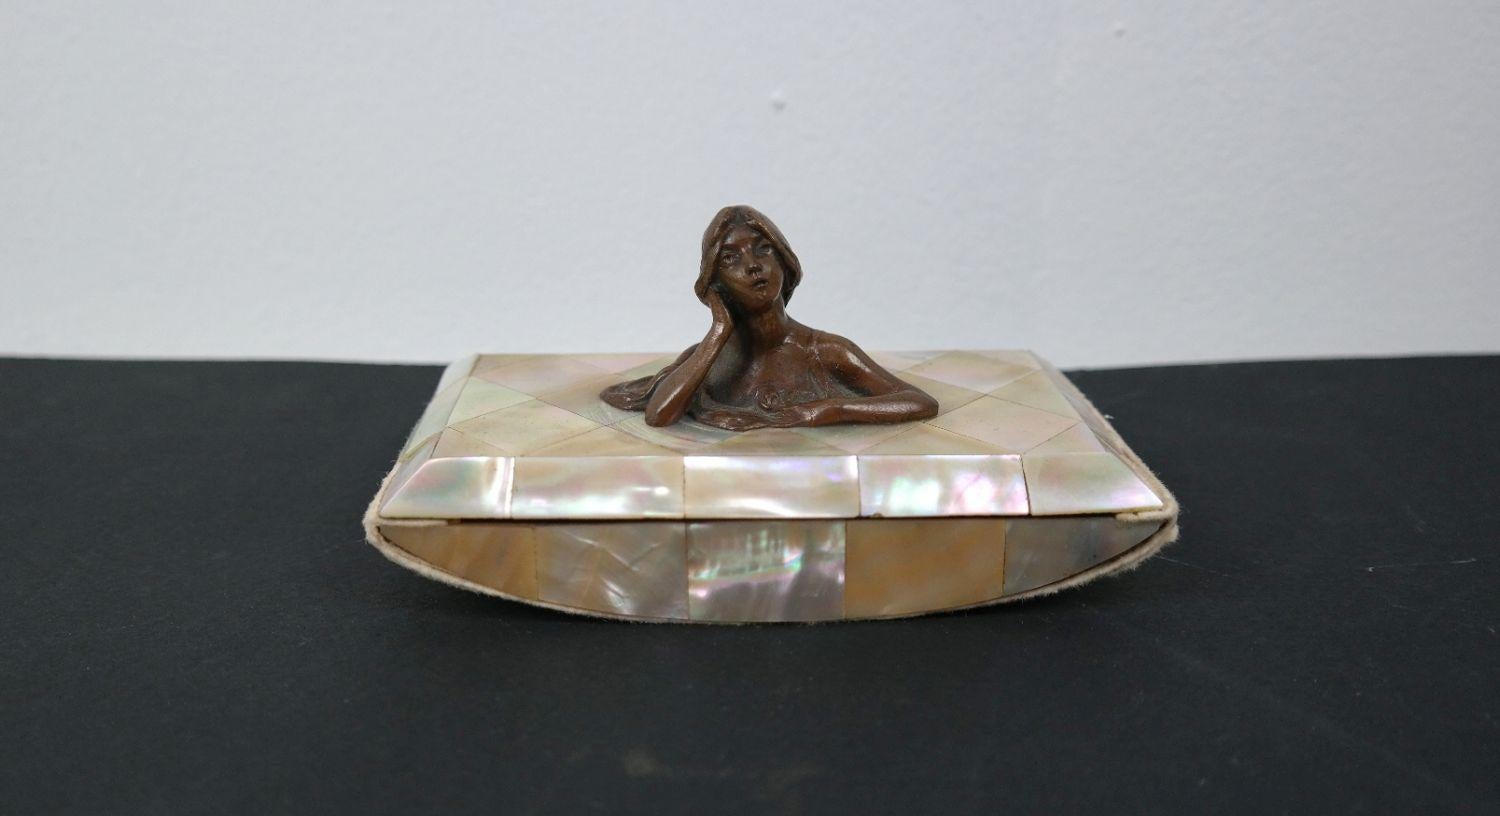 Rare, very nice condition, art nouveau, wonderful mother-of-pearl box with an iridescent effect, suitable for storing jewelry, business cards, or even cigarettes.  Beautiful collection piece!